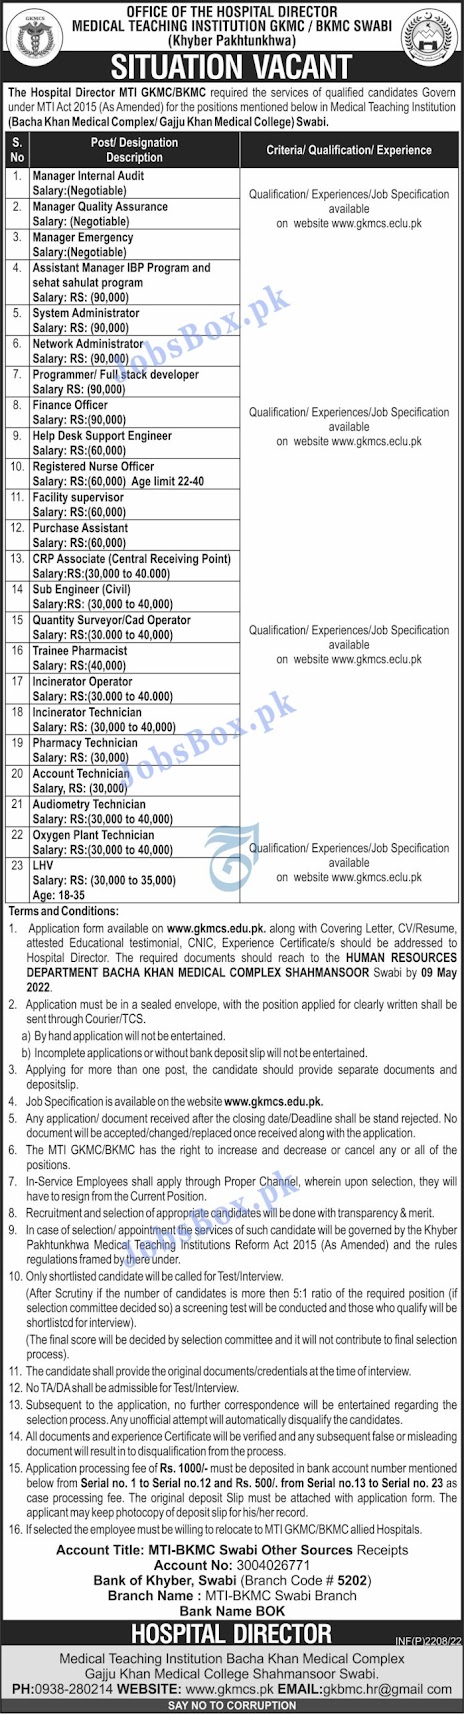 New Government jobs in Gajju Khan Medical College 2022